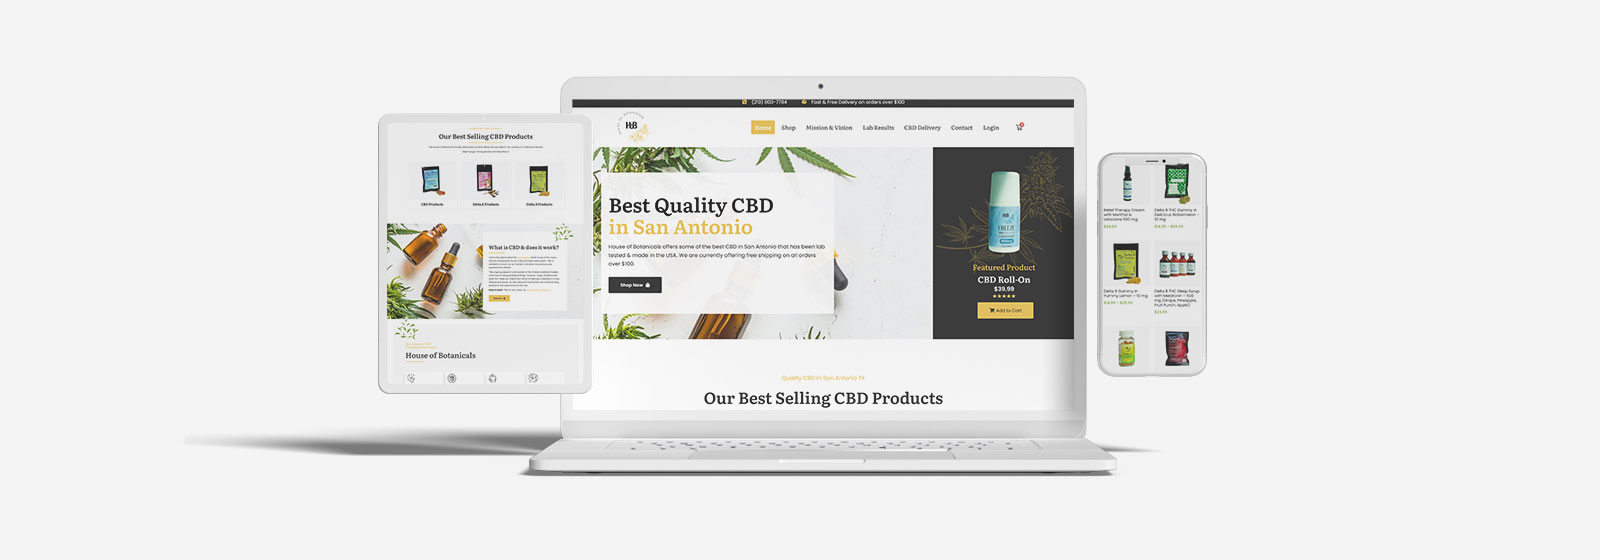 ecommerce website design services done for house of botanicals in San antonio